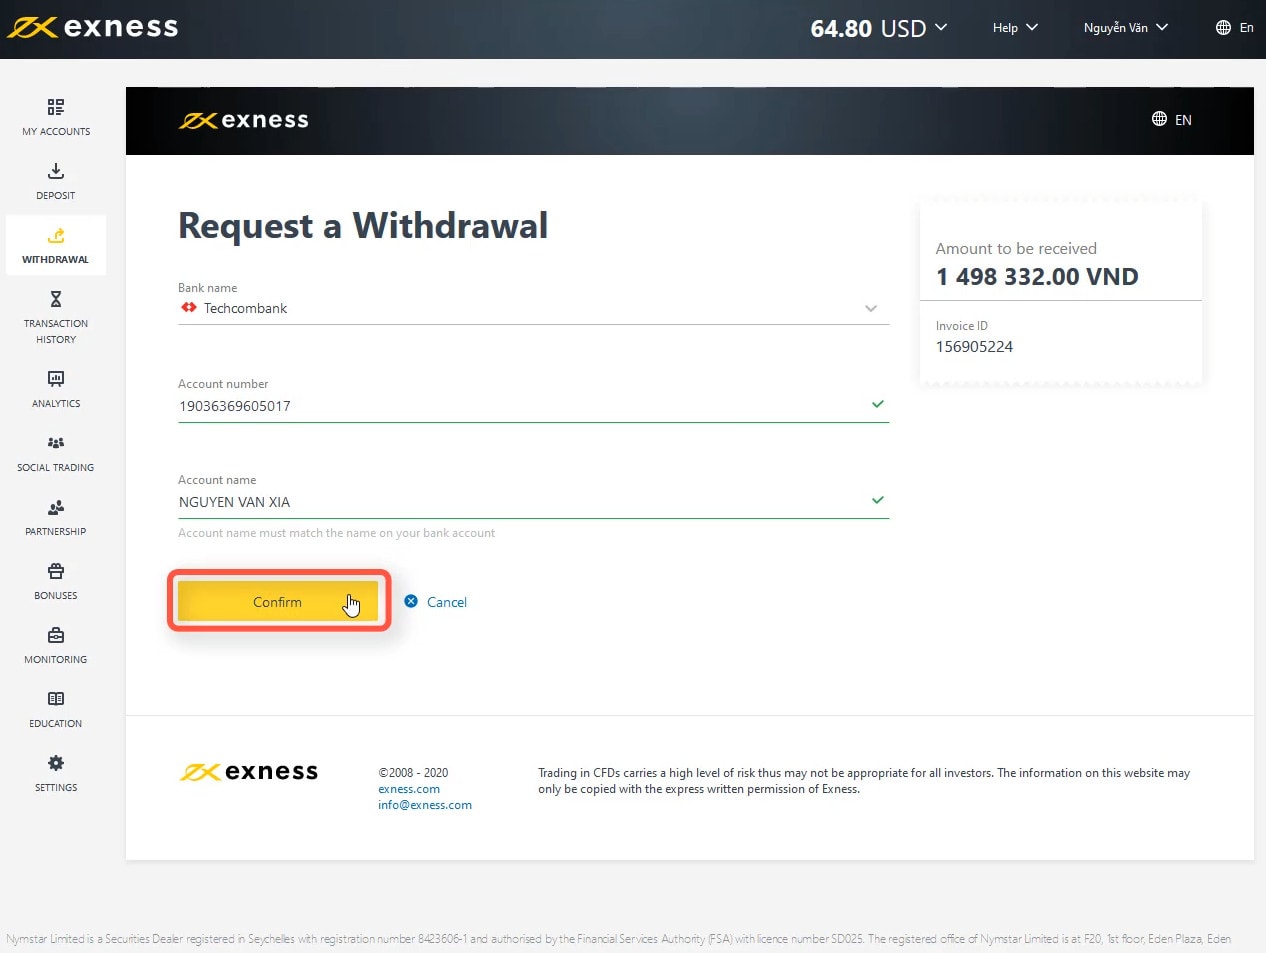 Check the withdrawal information